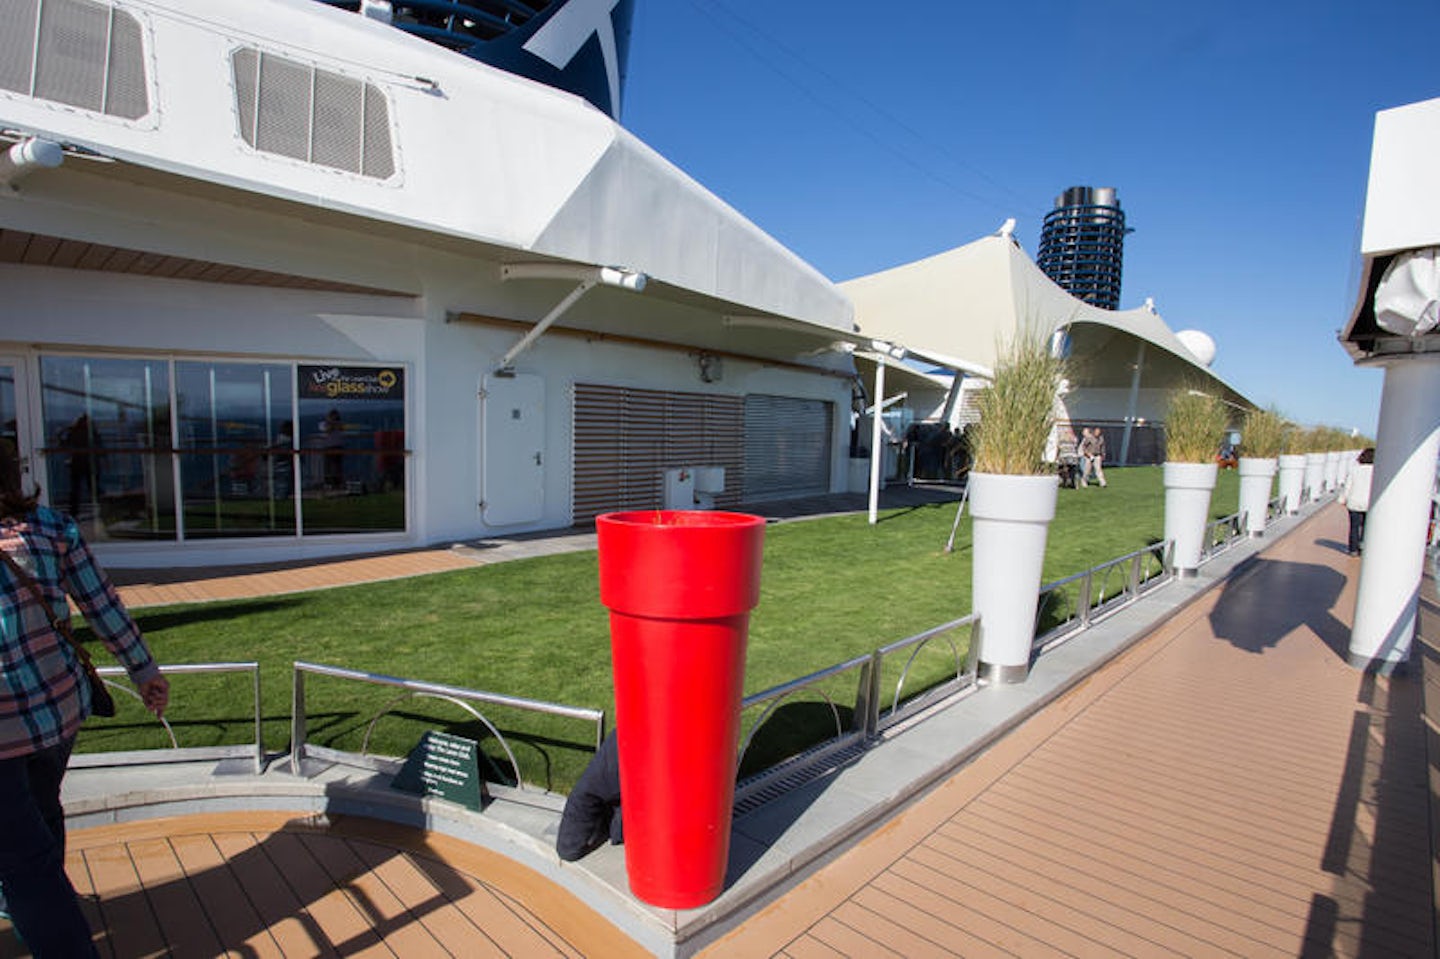 The Lawn Club on Celebrity Solstice